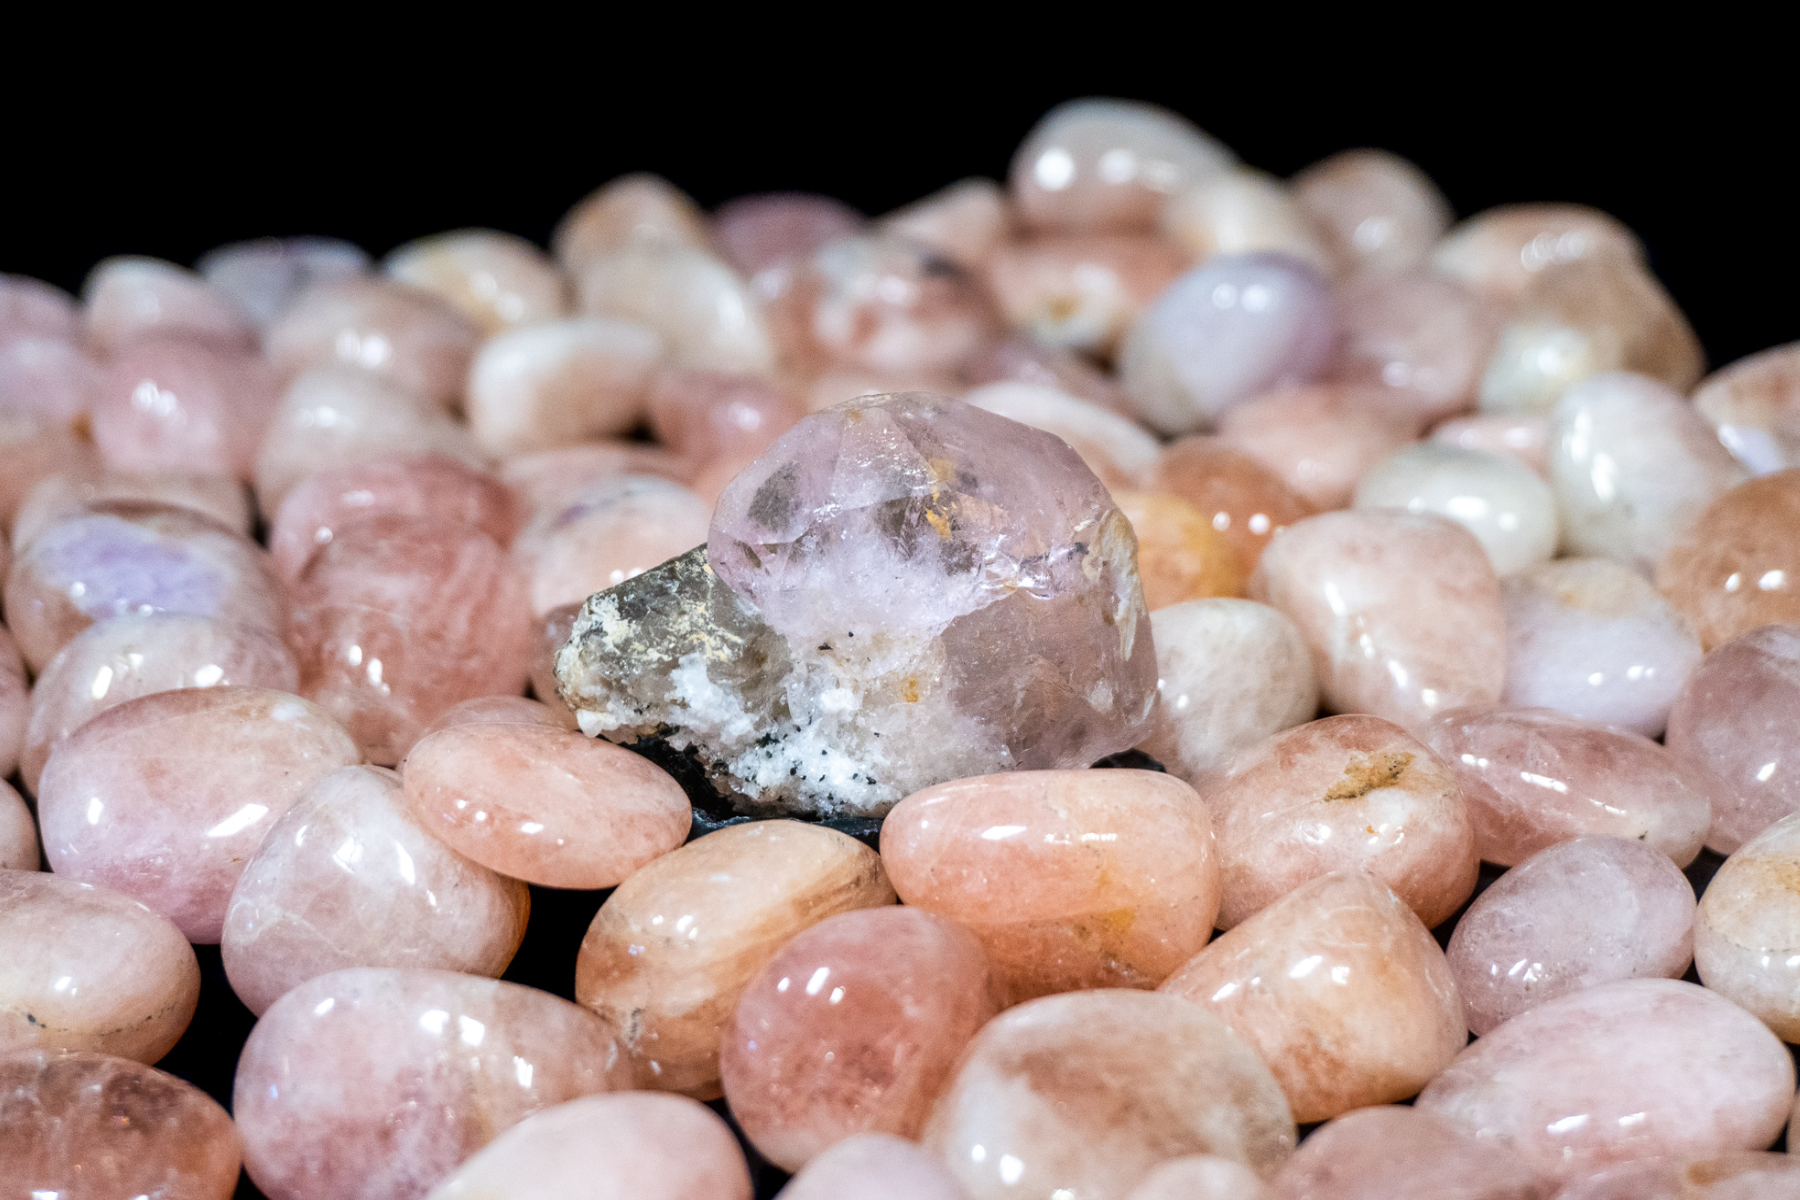 A group of morganite stones